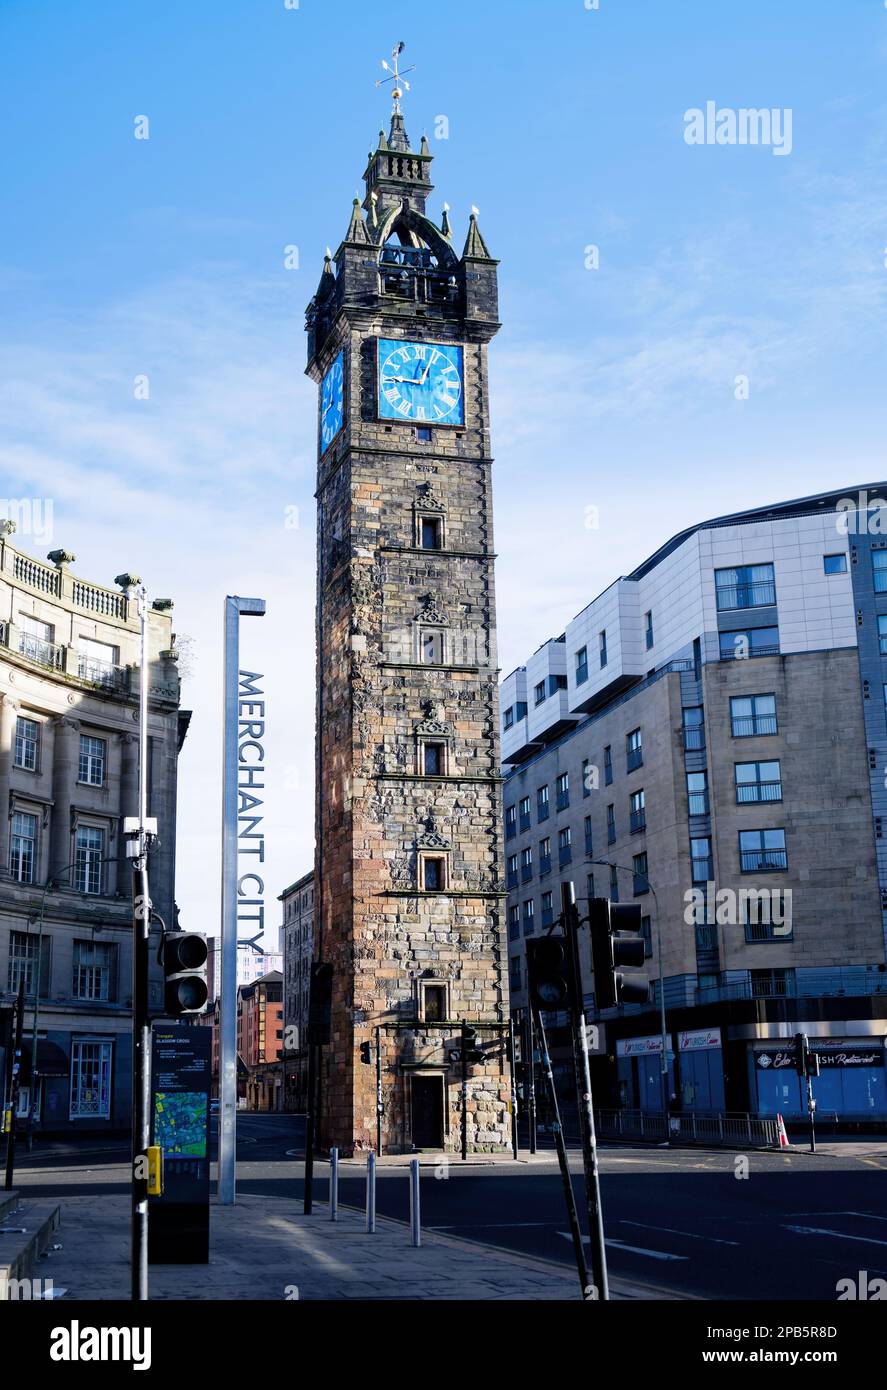 Tolbooth Clock Steeple Tower in Merchant City area of Glasgow Stock Photo